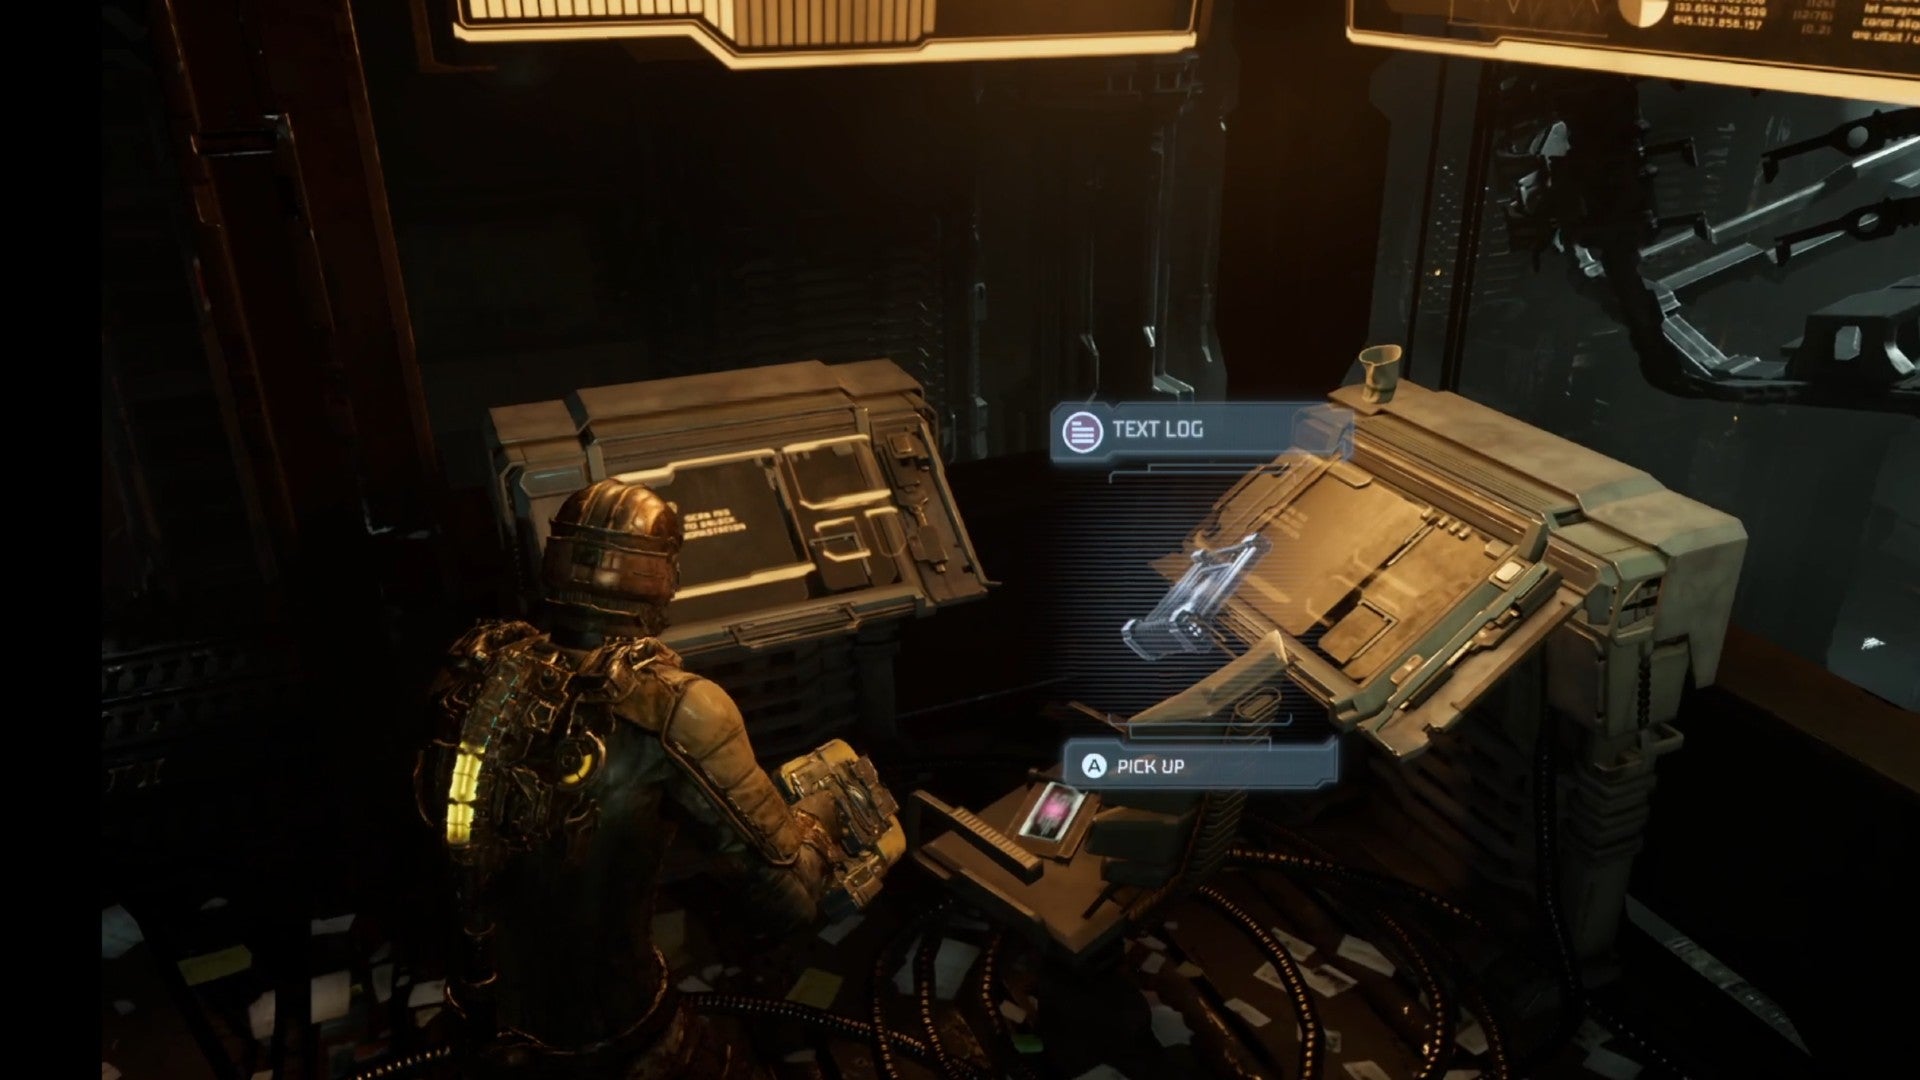 Dead Space image showing a Text Log on a chair, next to some orange terminals.